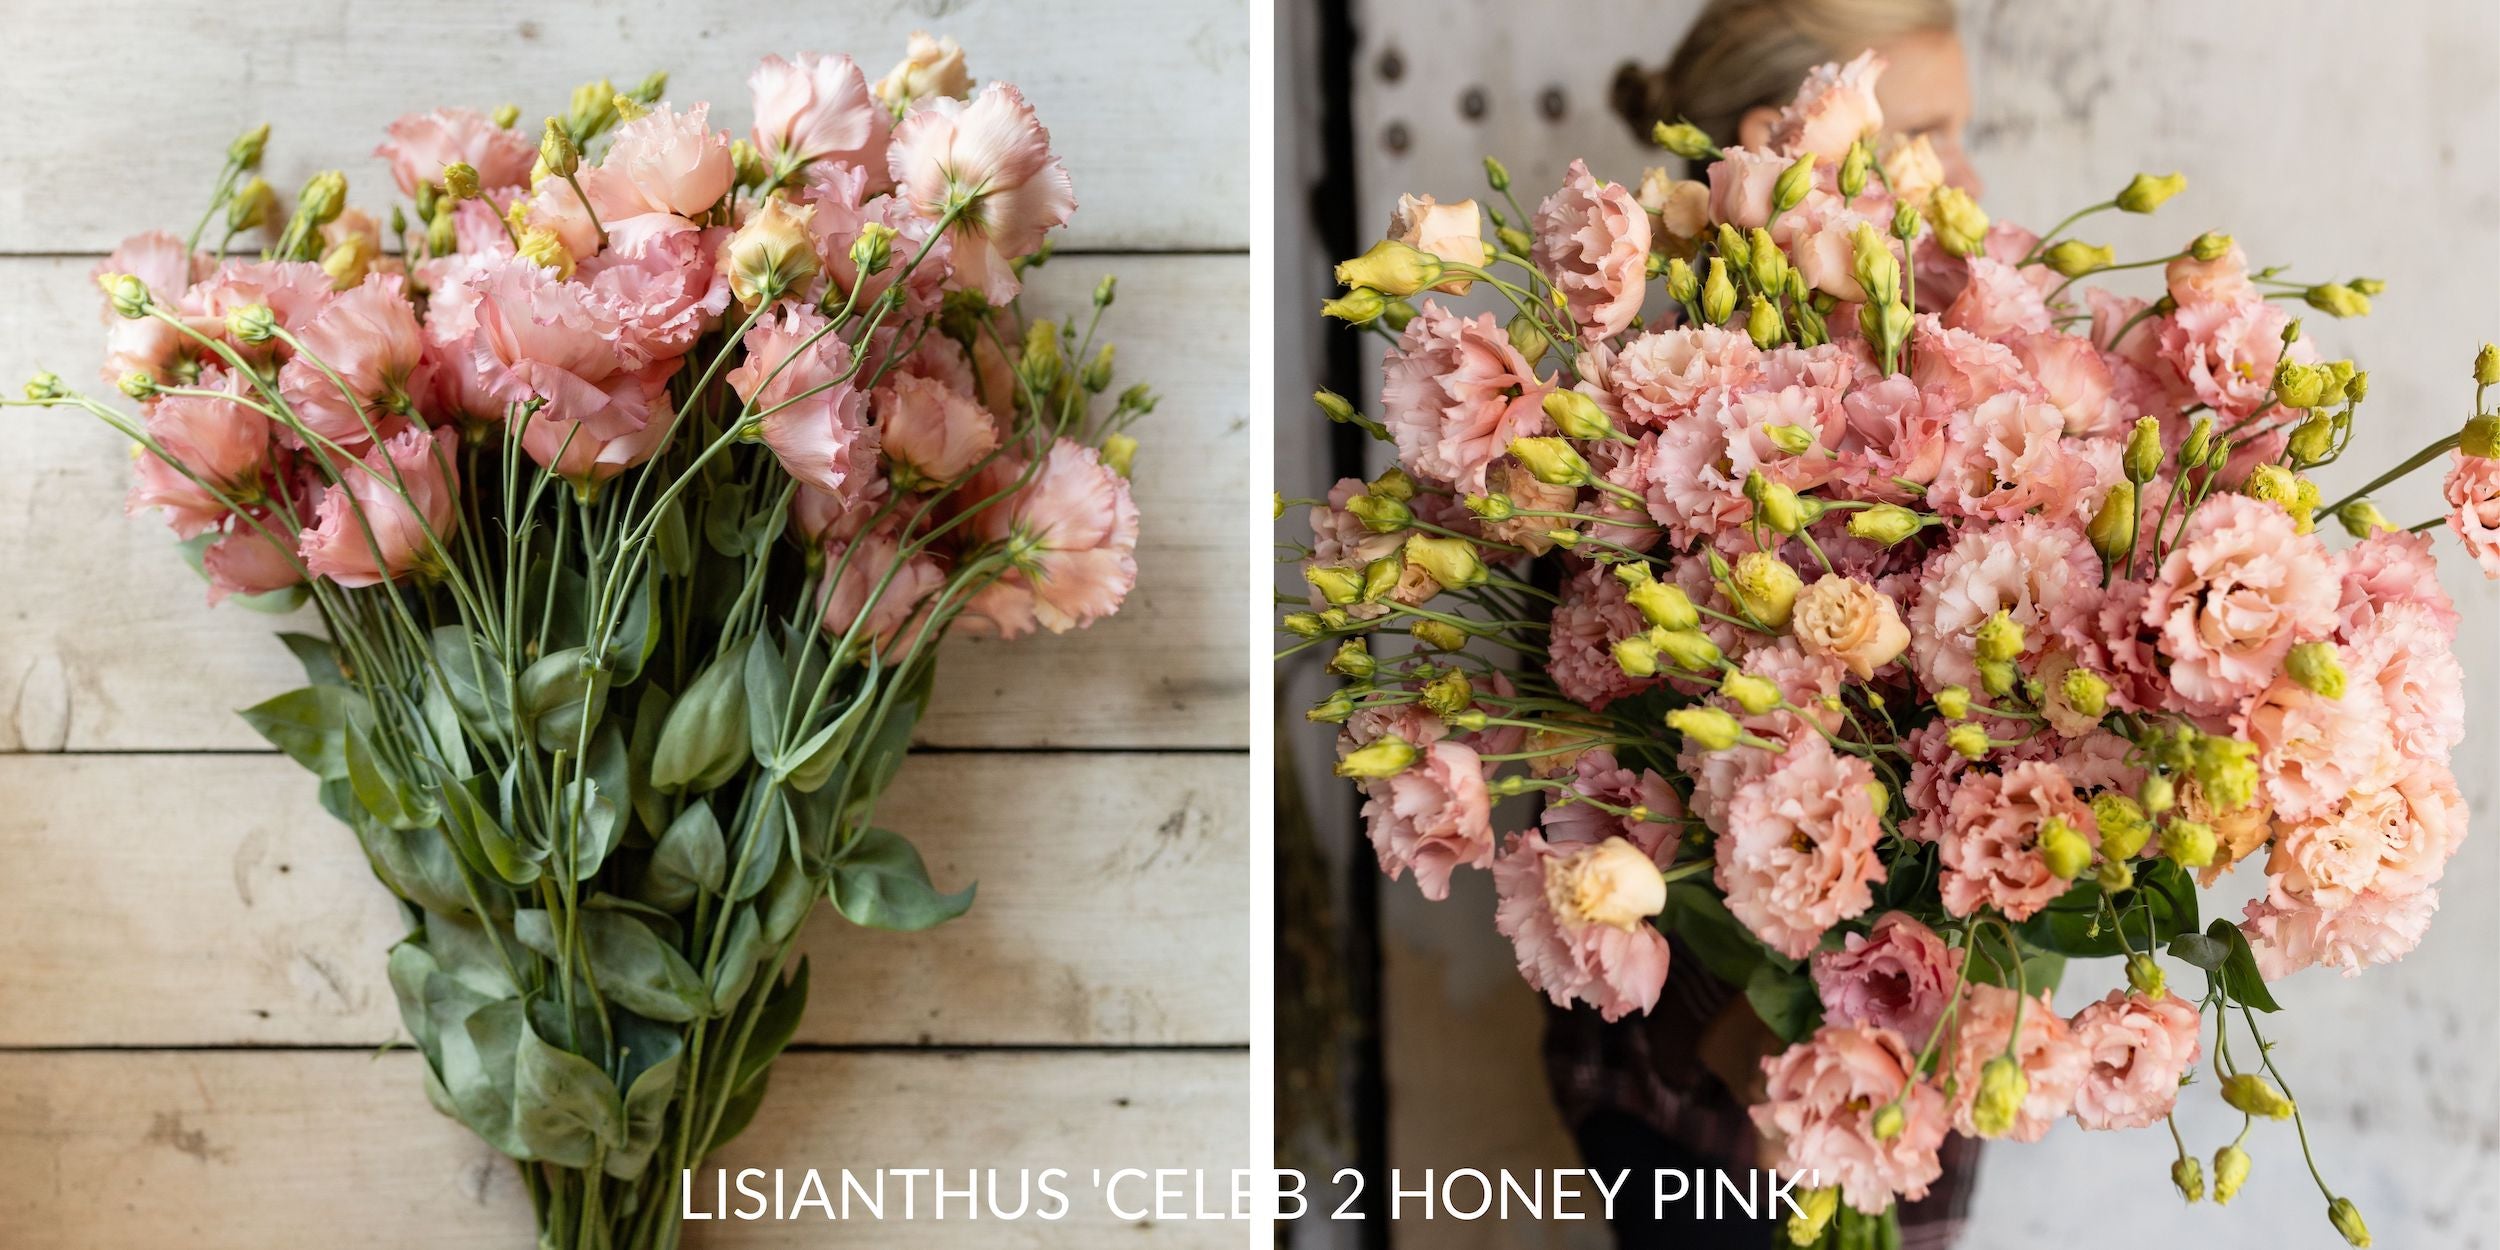 Lisianthus flowers in full bloom, displaying their delicate, ruffled petals and soft, varied colors.